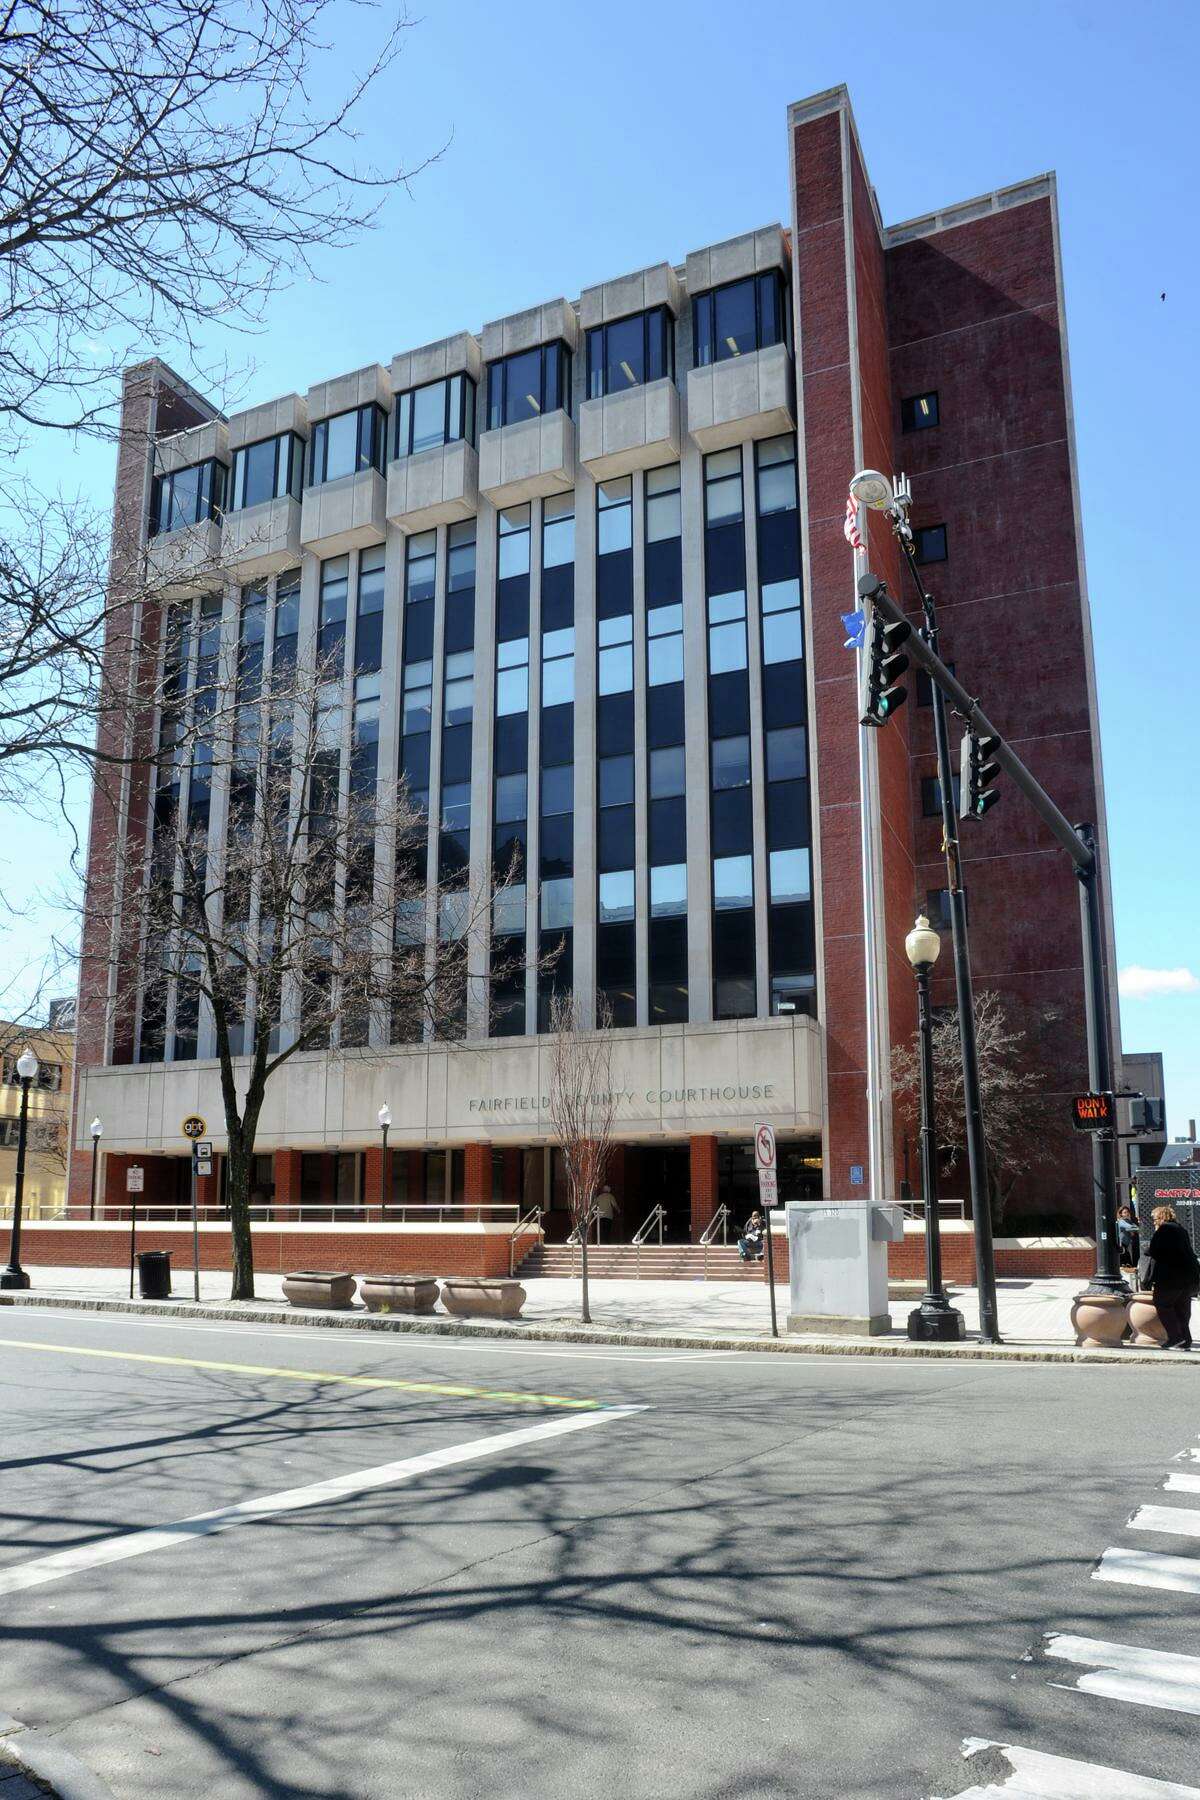 Exterior of the Fairfield County Courthouse, in Bridgeport, Conn.